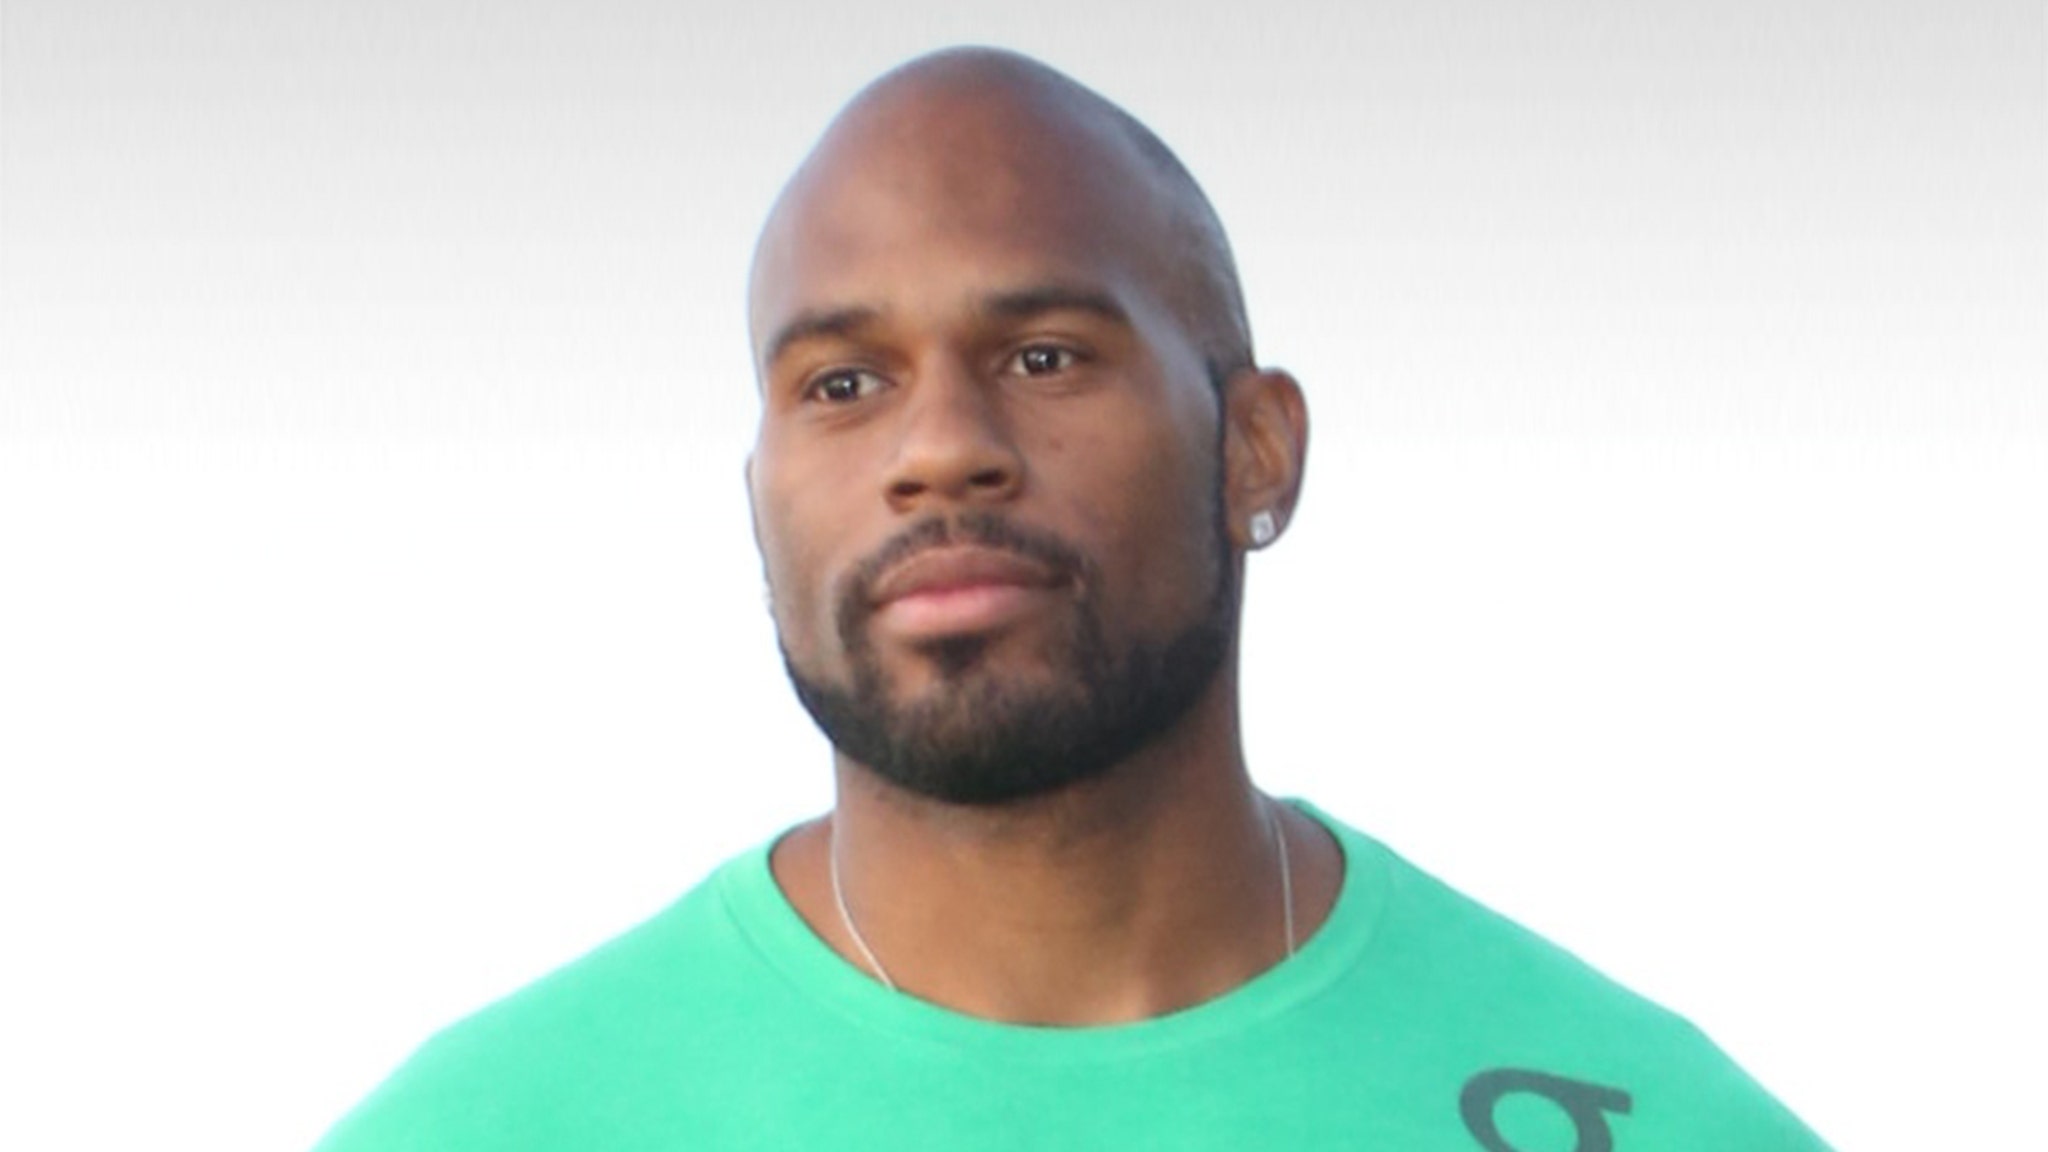 WWE Star Shad Gaspard’s Widow Sues LA County Over His Drowning Death